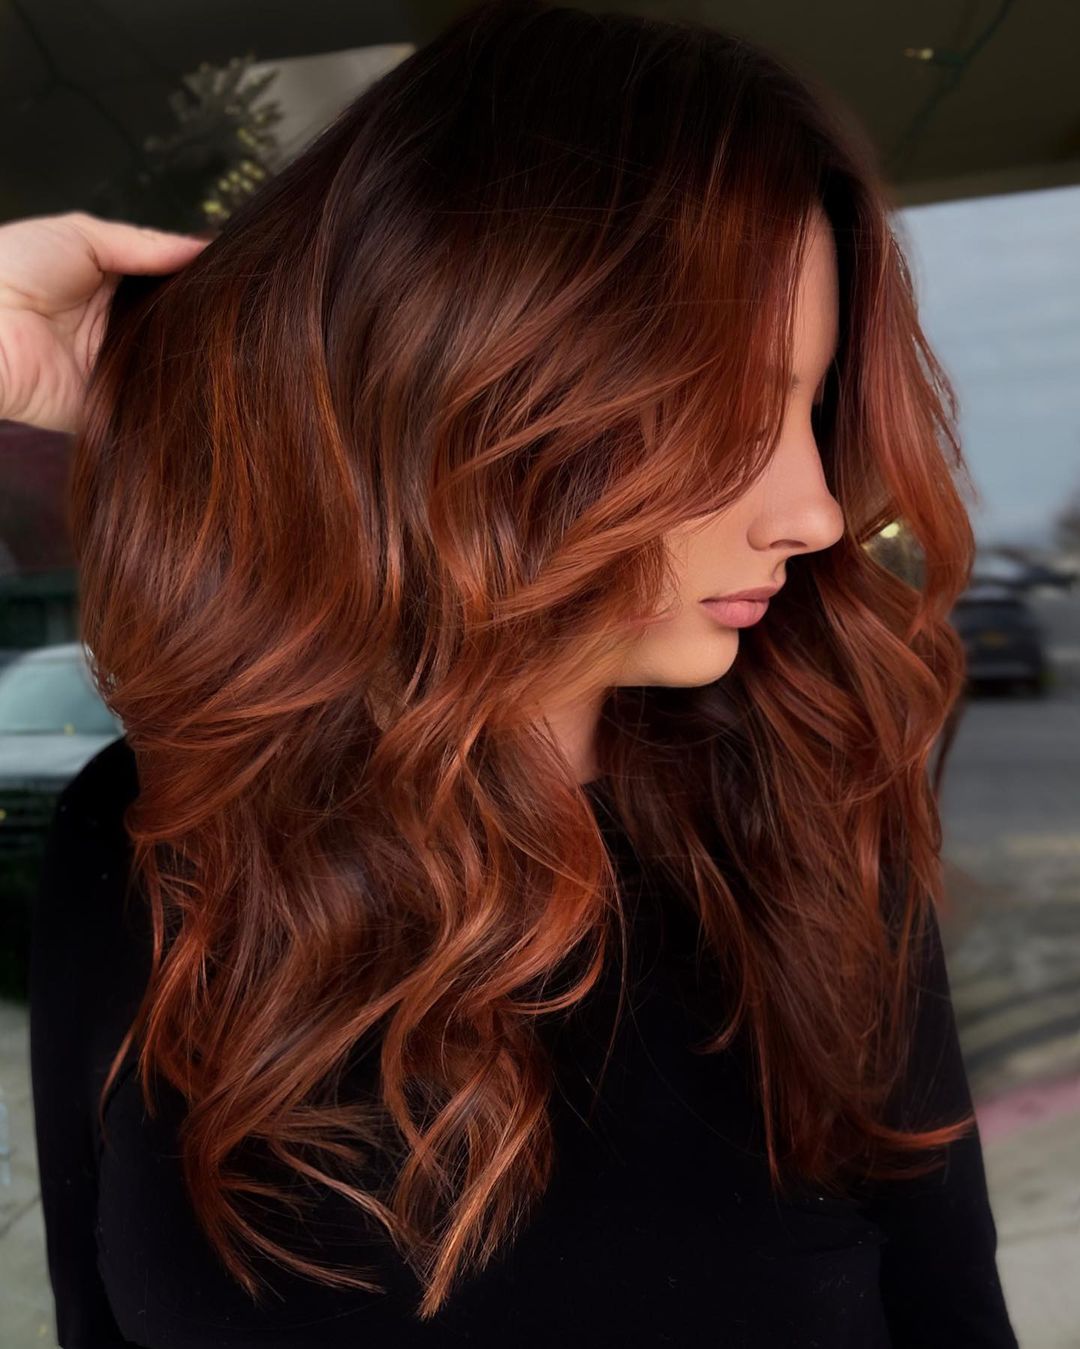 Long Wavy Copper Red Hair